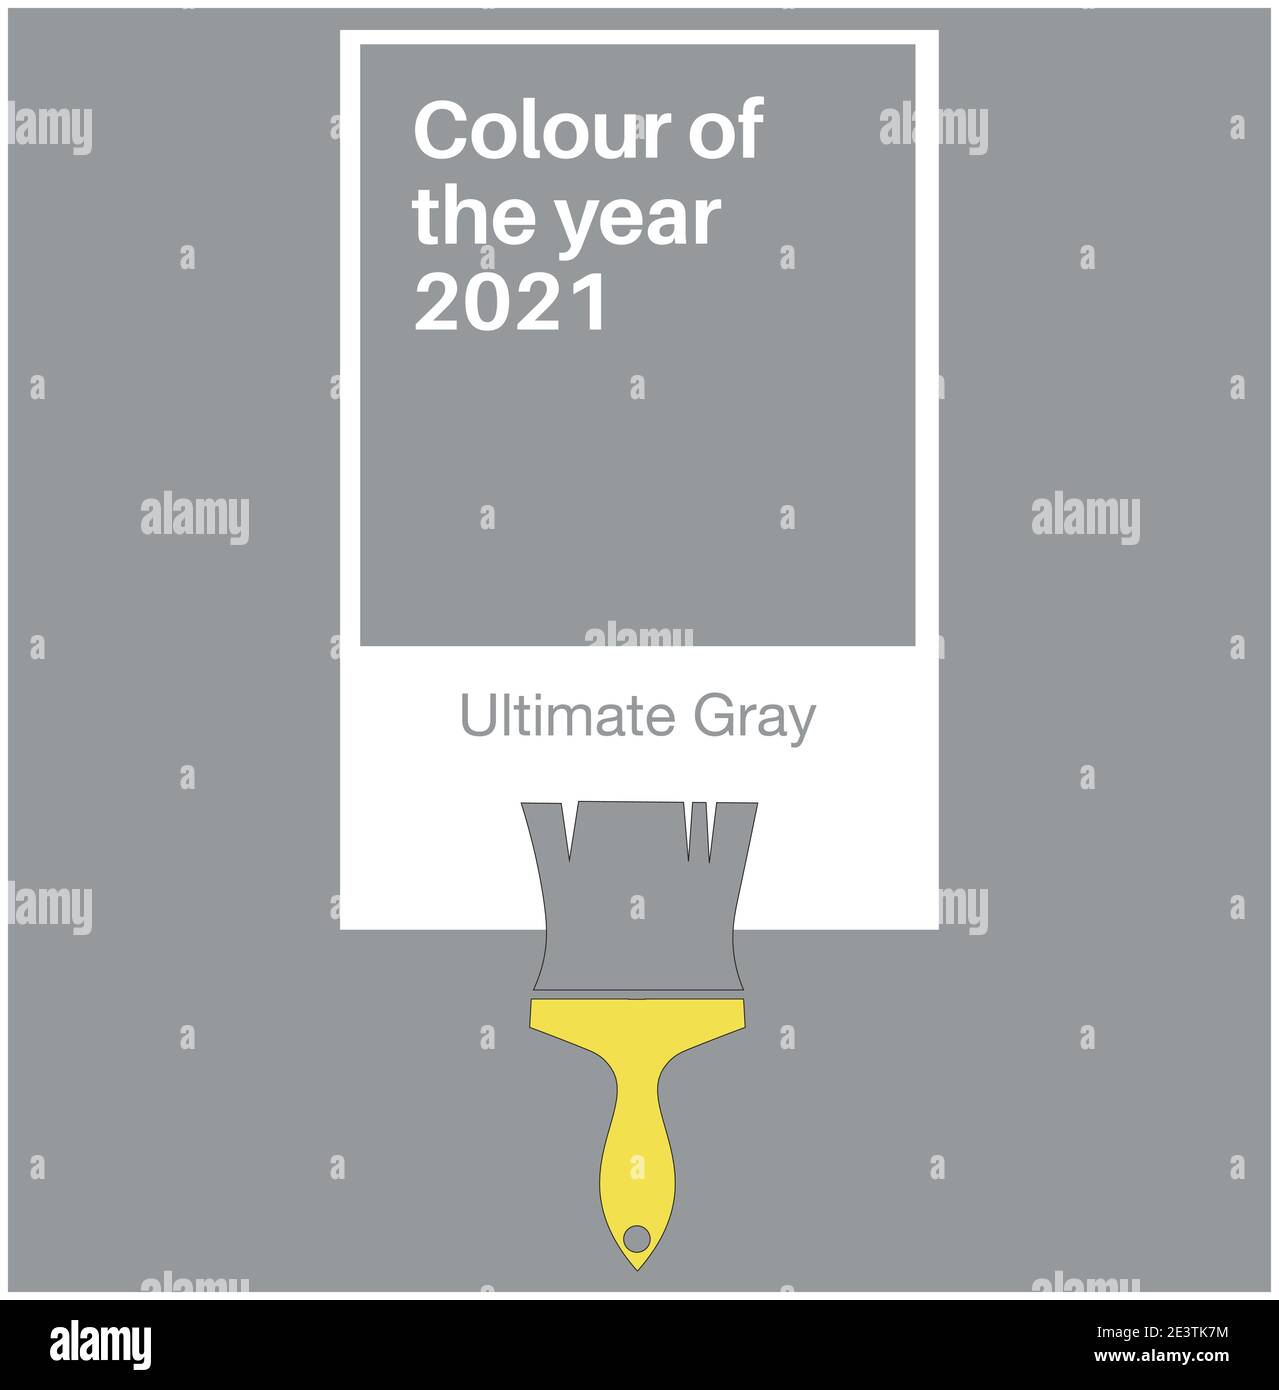 Ultimate Gray and Illuminating Yellow Trending Colors of the Year 2021. Color pattern, vector  illustration Stock Vector